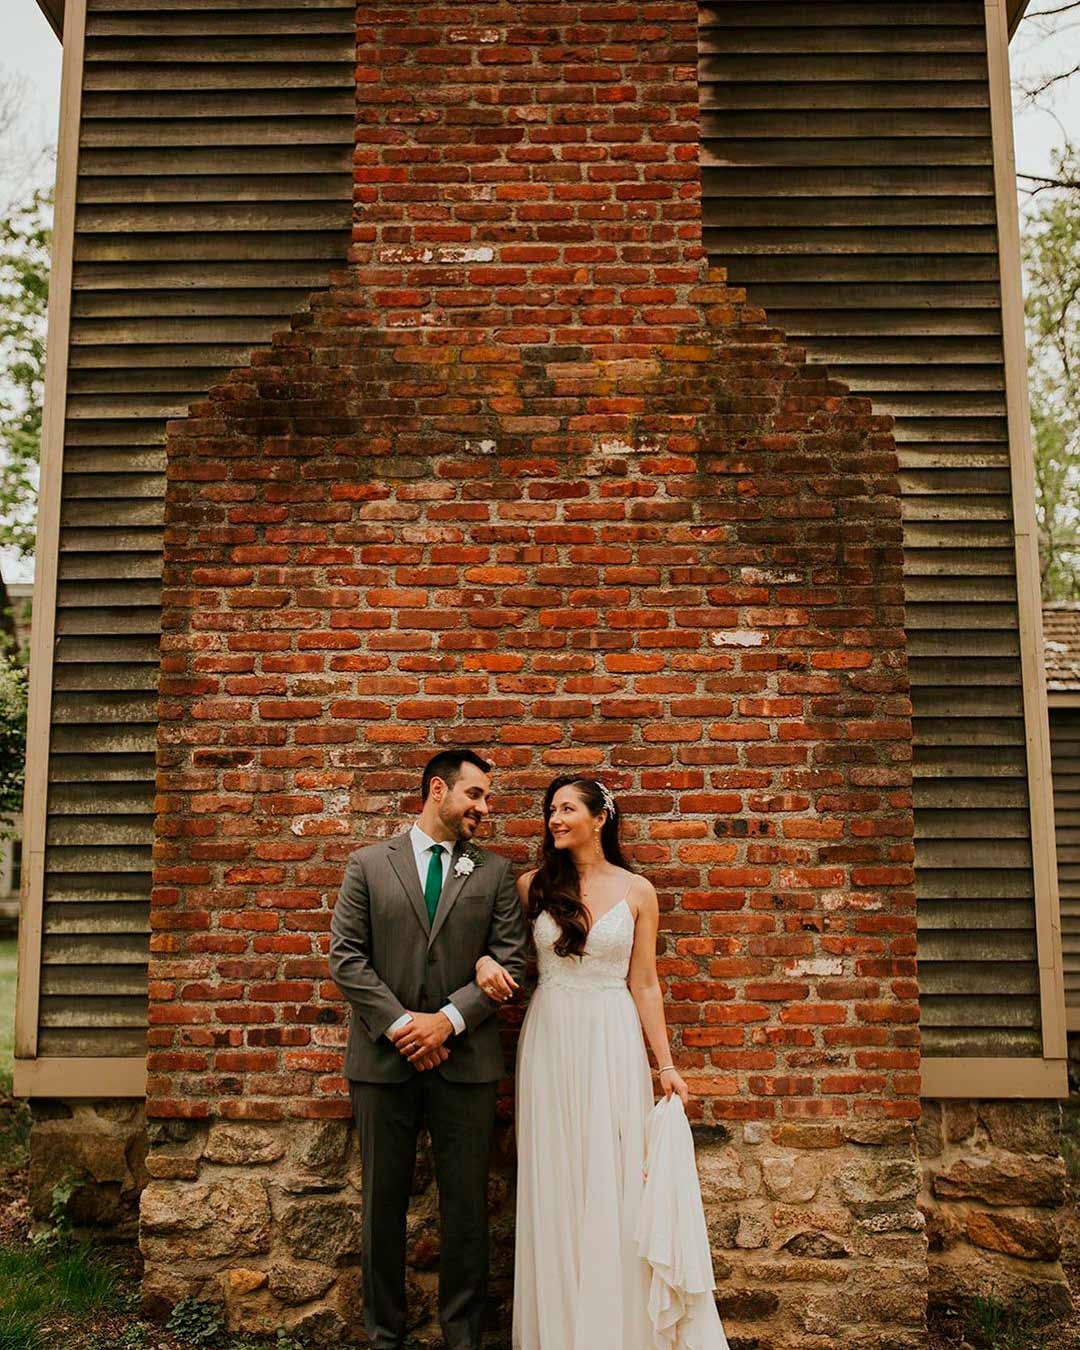 rustic wedding venues in new jersey outdoor wall